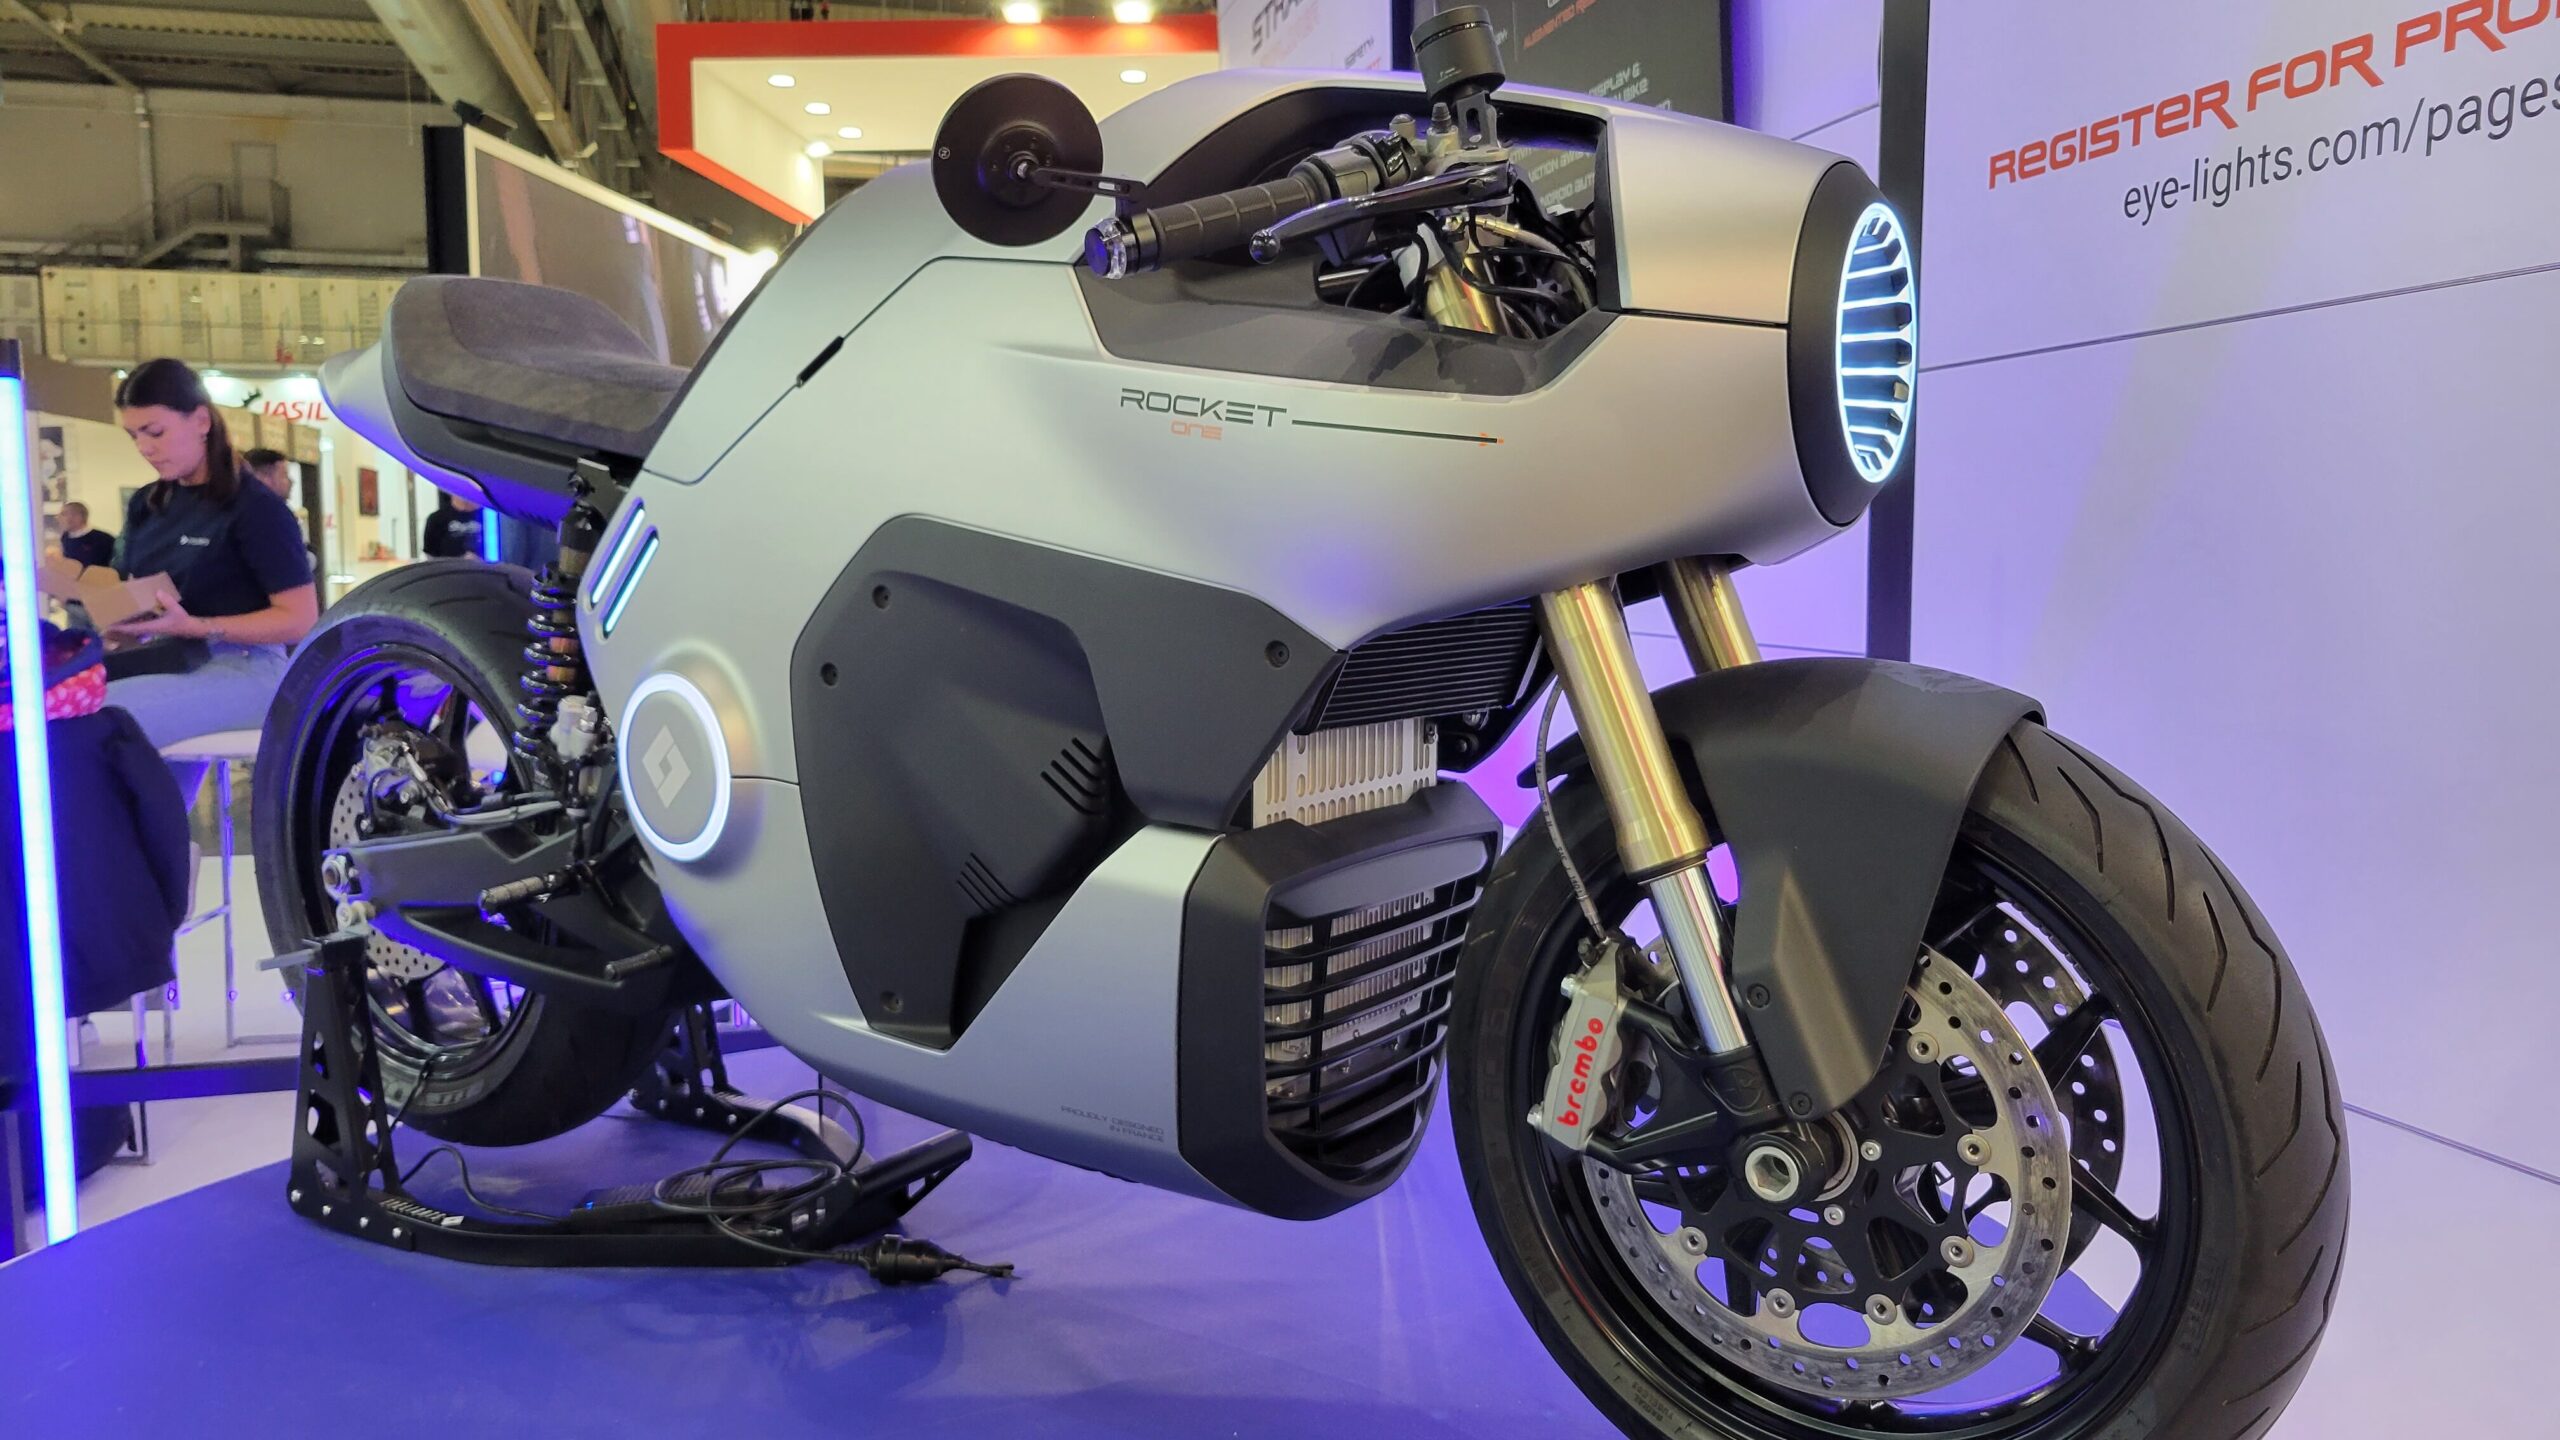 The Rocket One is a futuristic high performance electric motorcycle.